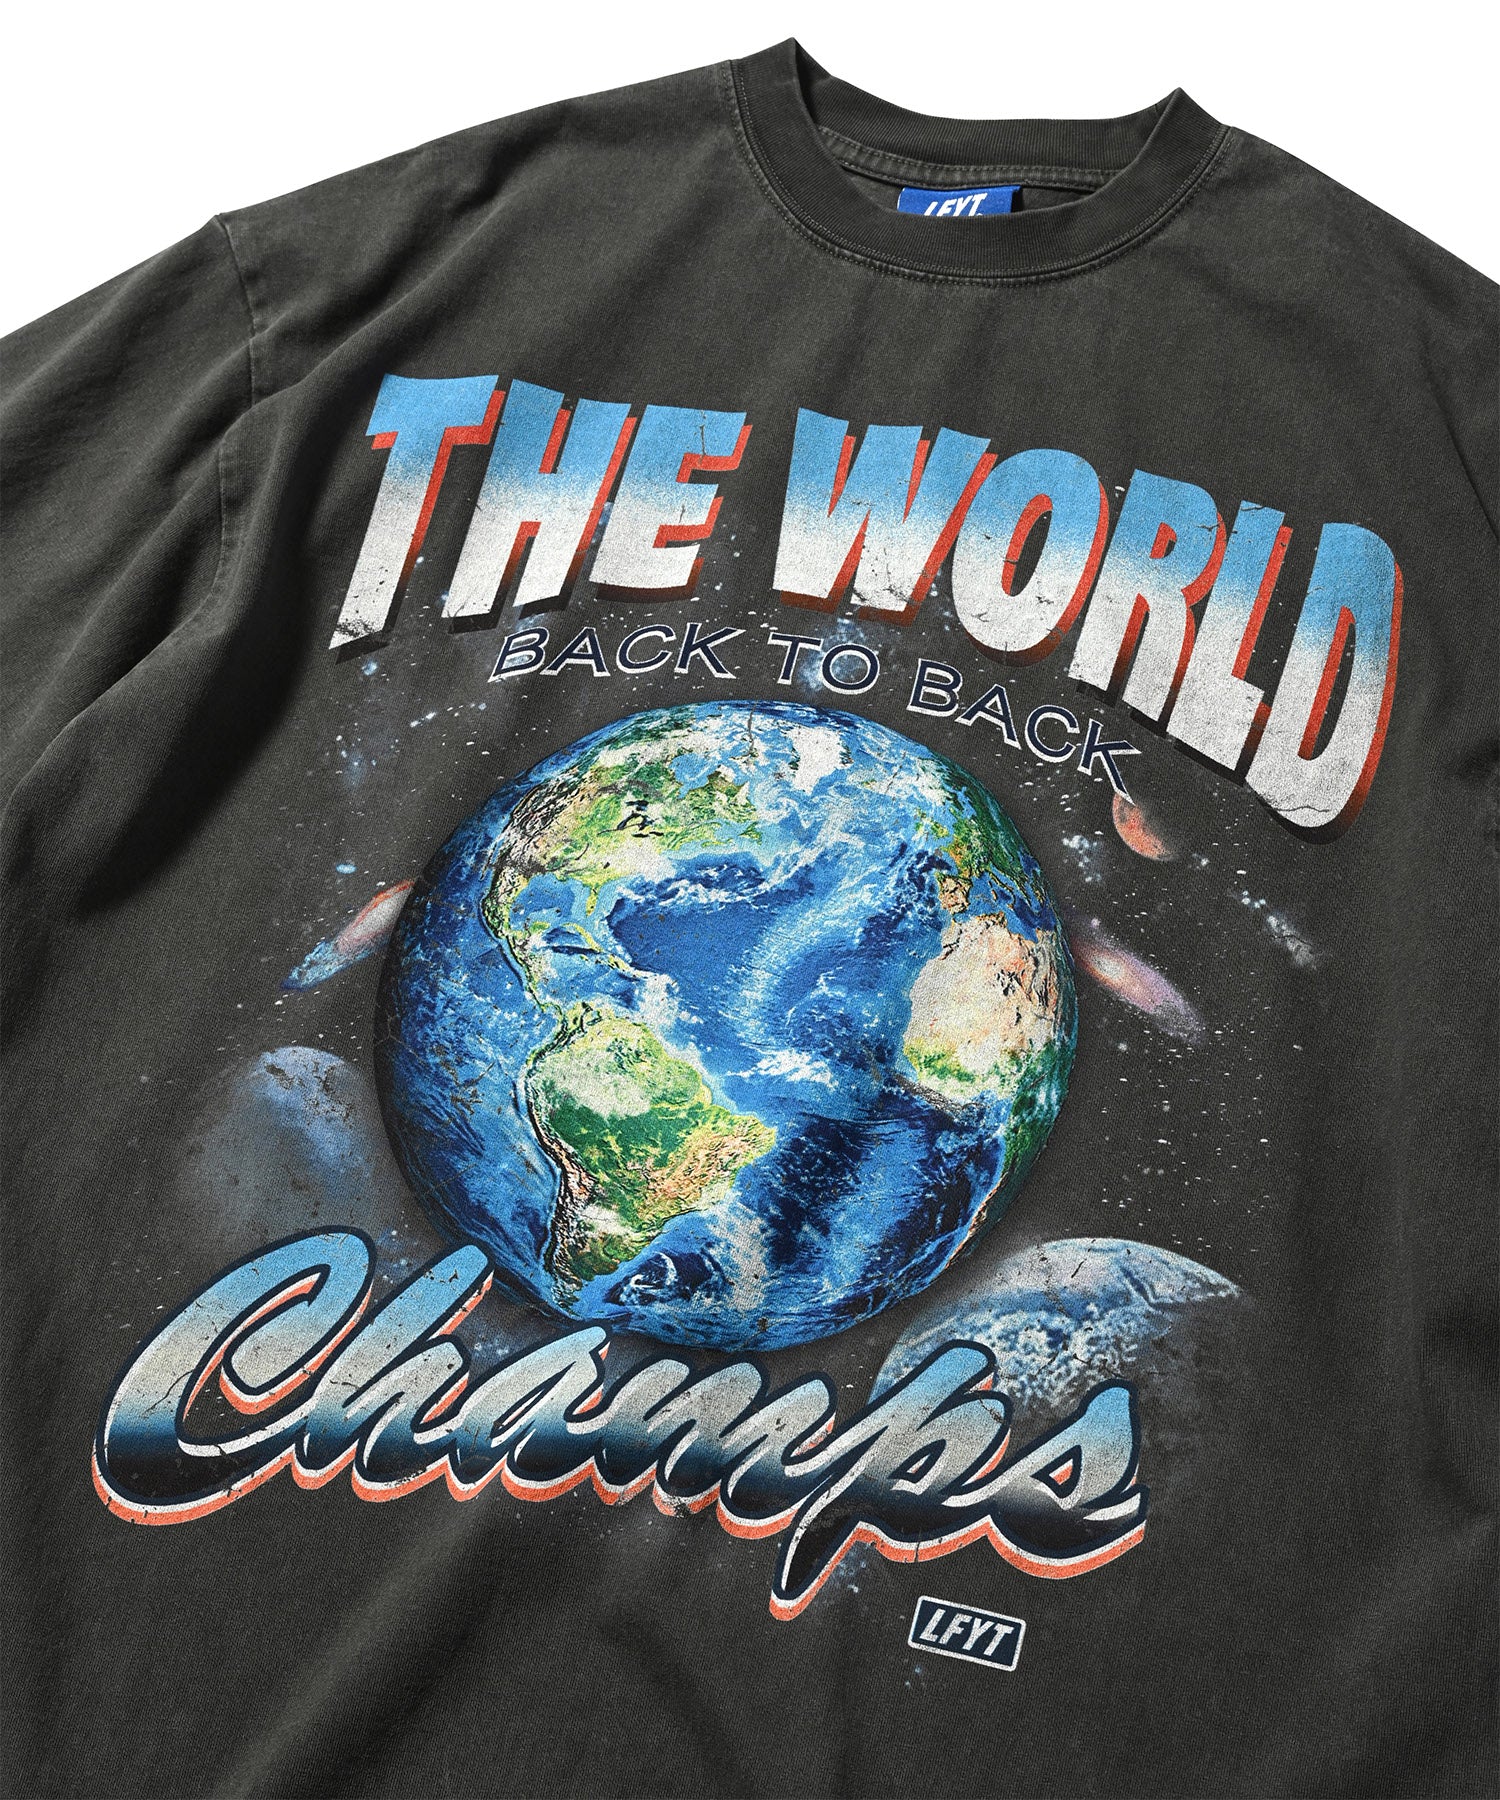 LFYT - WORLD CHAMPS TEE TYPE-9 - VINTAGE EDITION LS240112